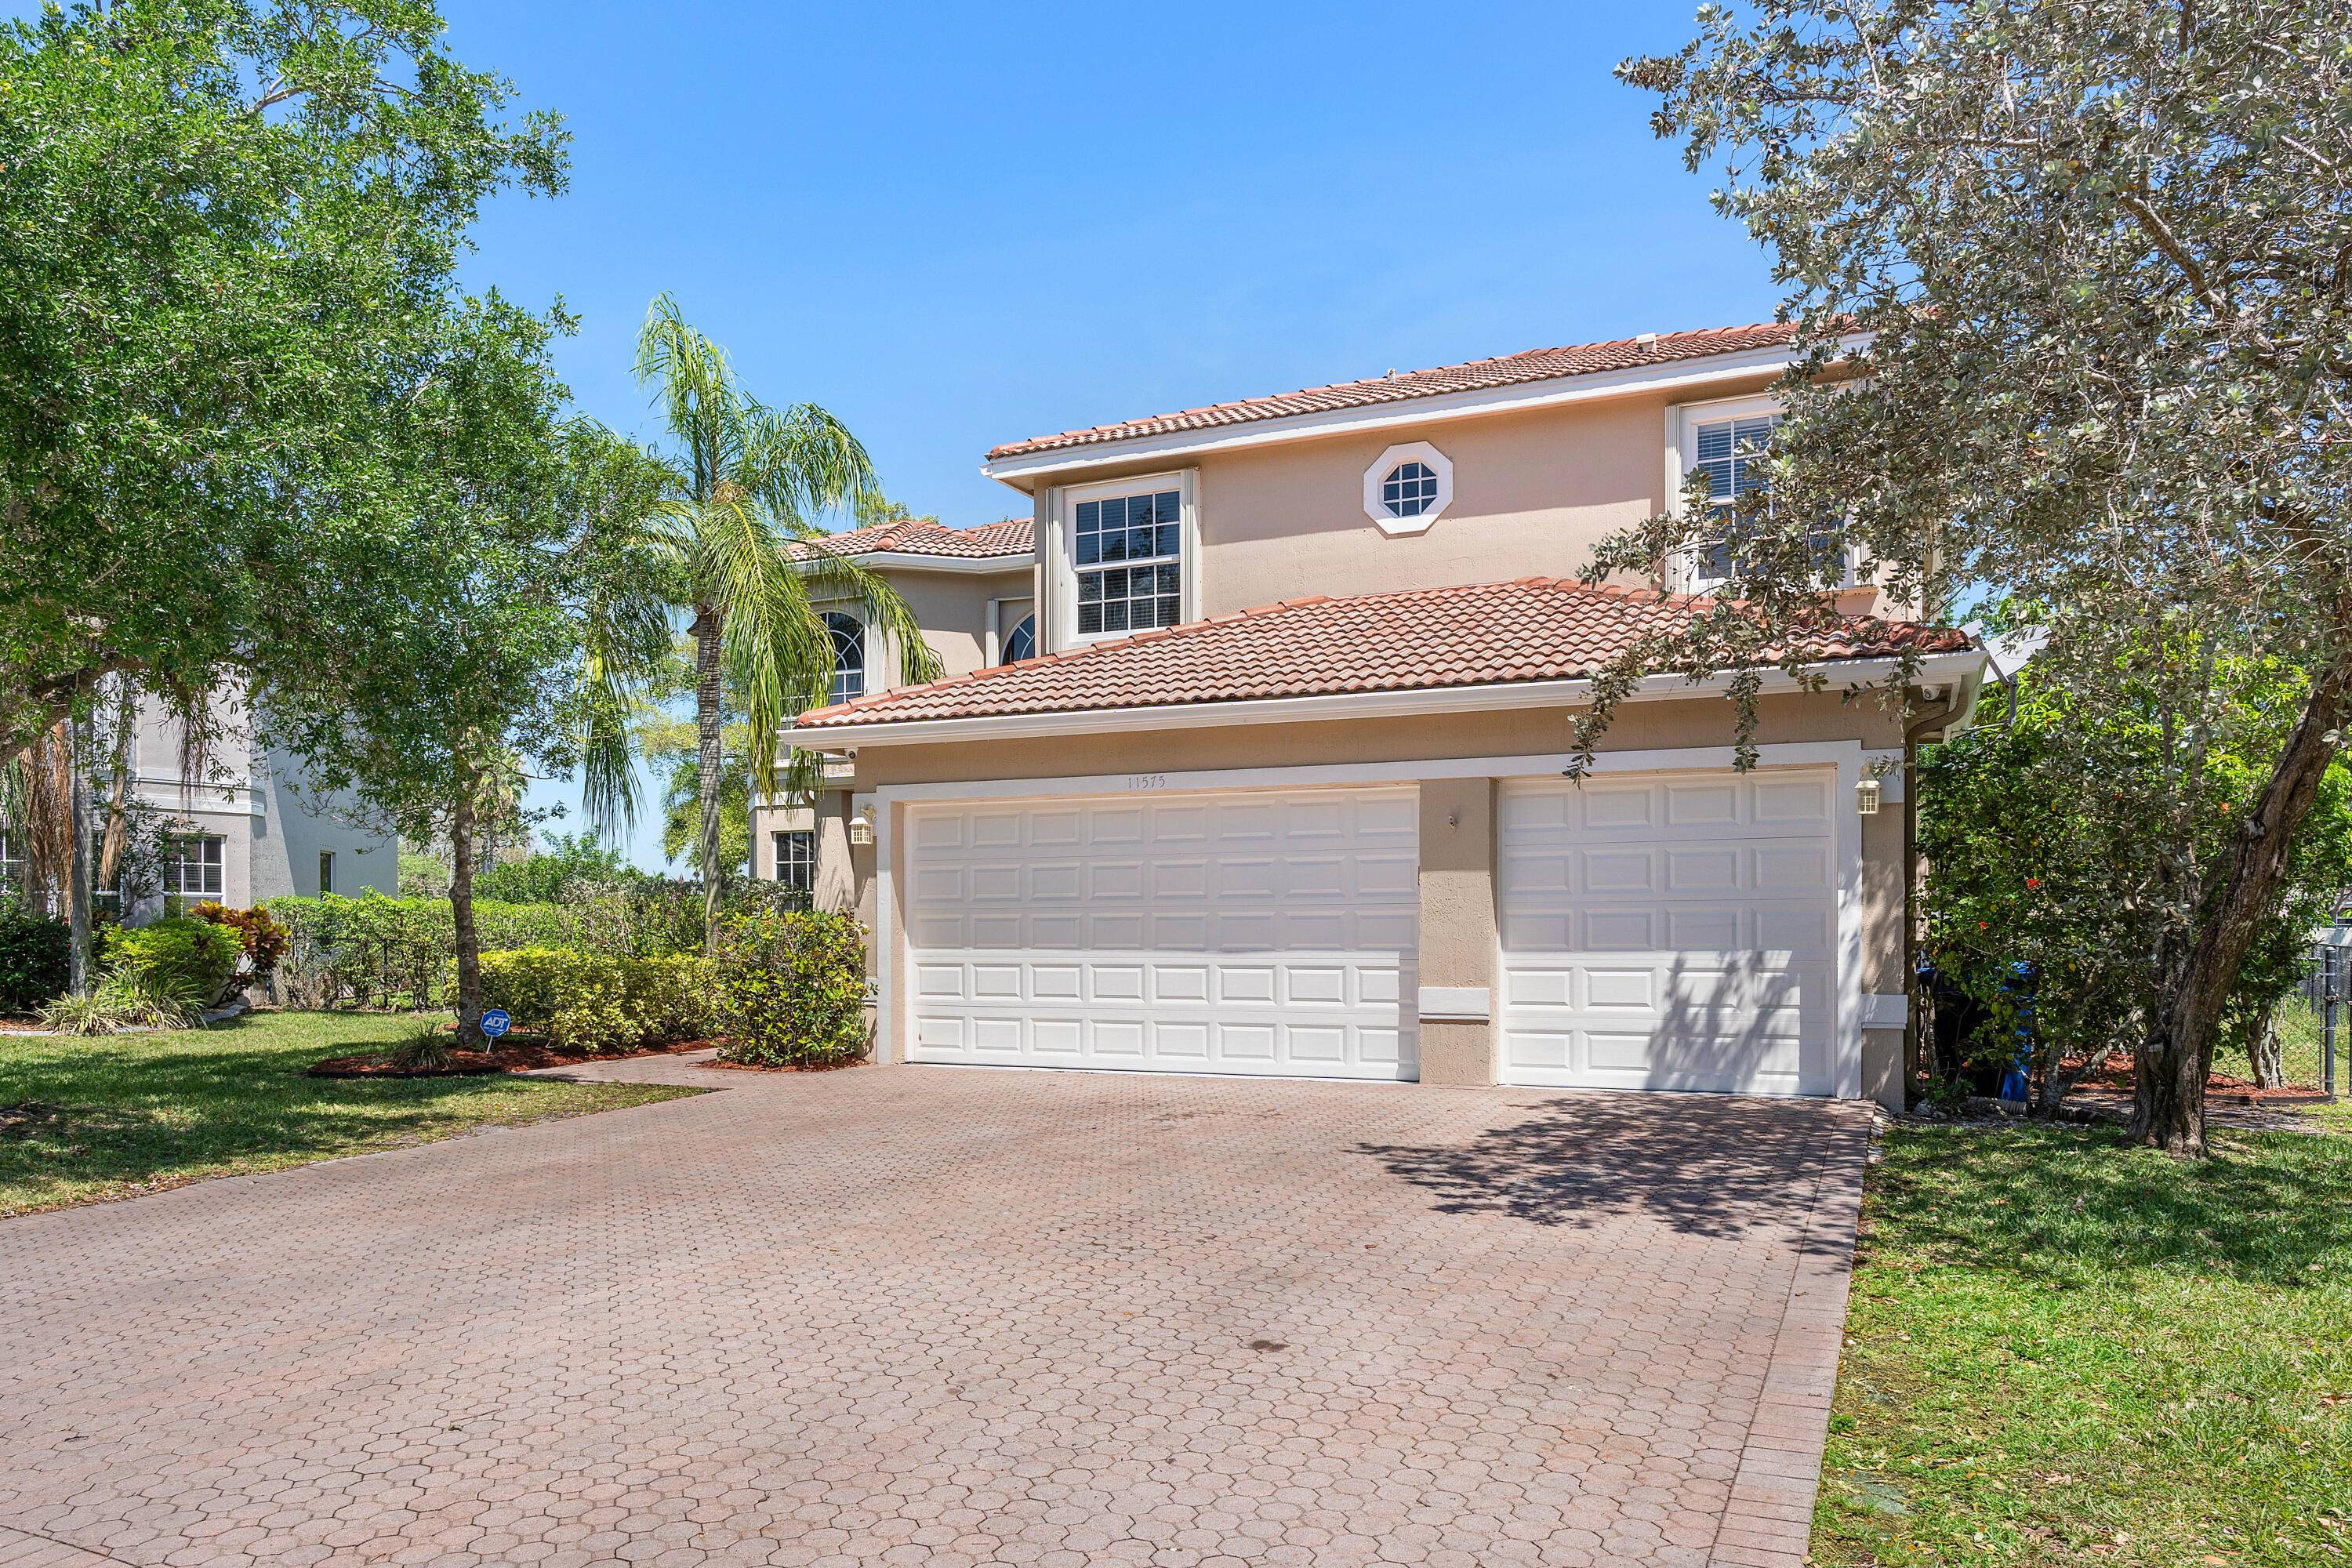 Discover this exquisite 5 bedroom, 3 bathroom Pool home nestled in the sought after Park Place community, just NW of Coral Springs.